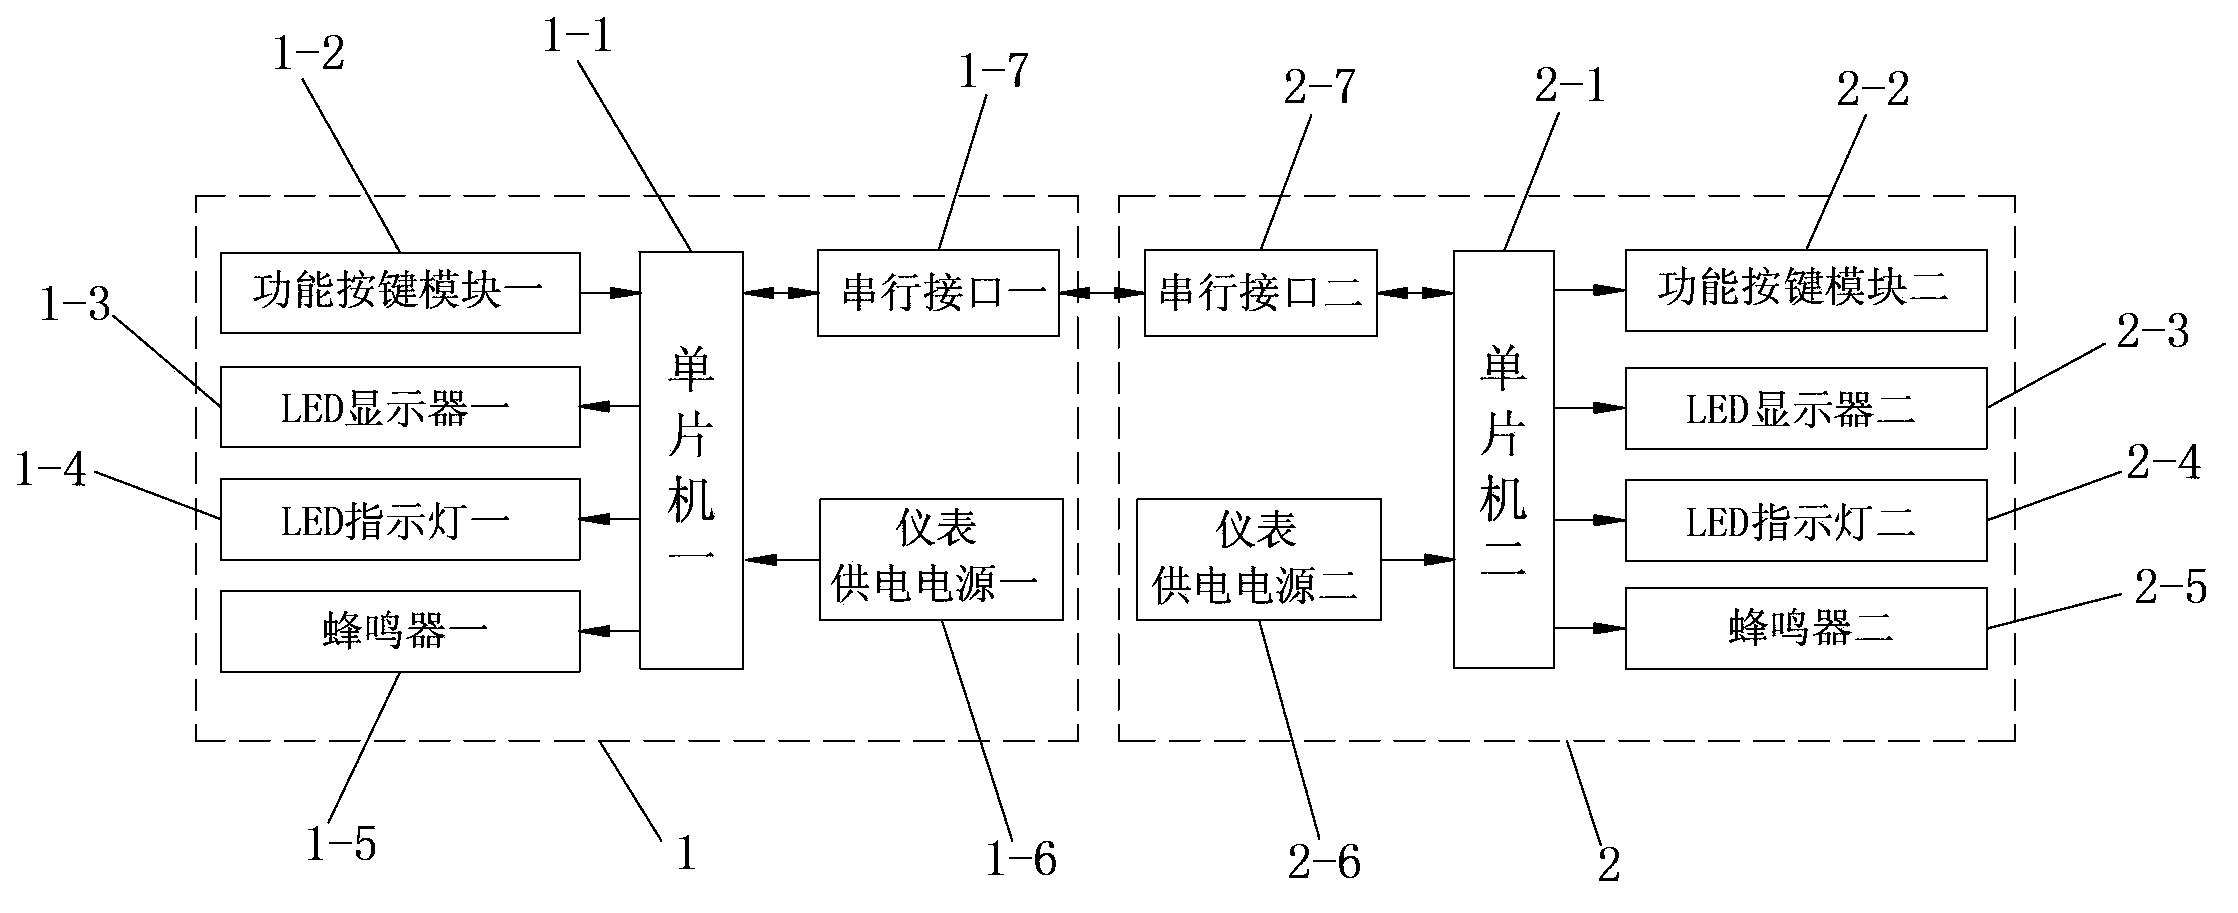 Electrical signal control device